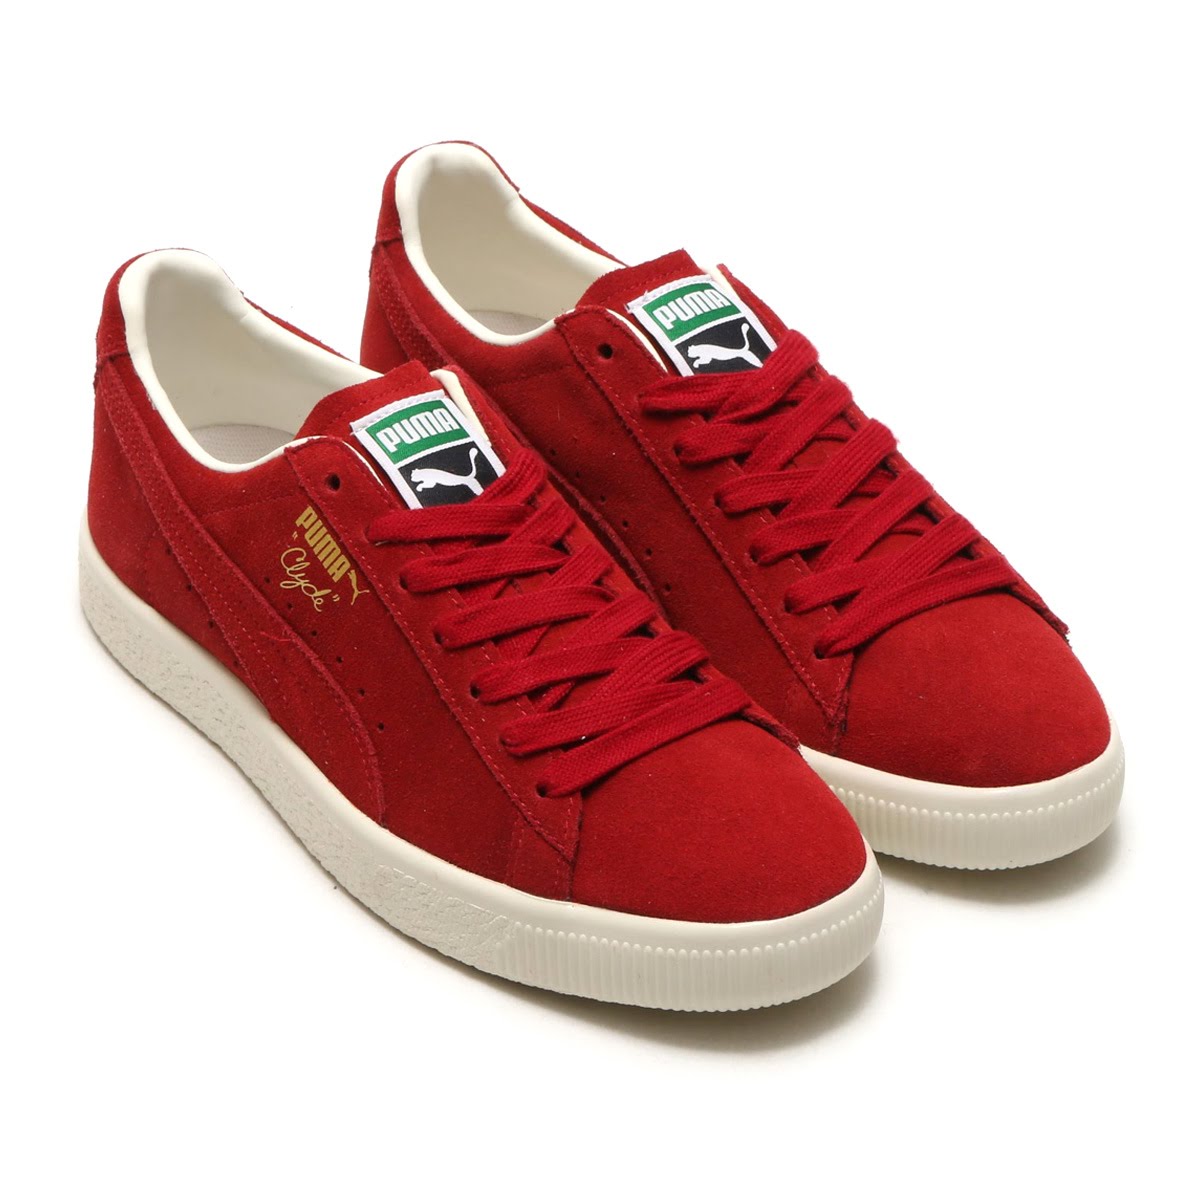 puma casual shoes lowest price